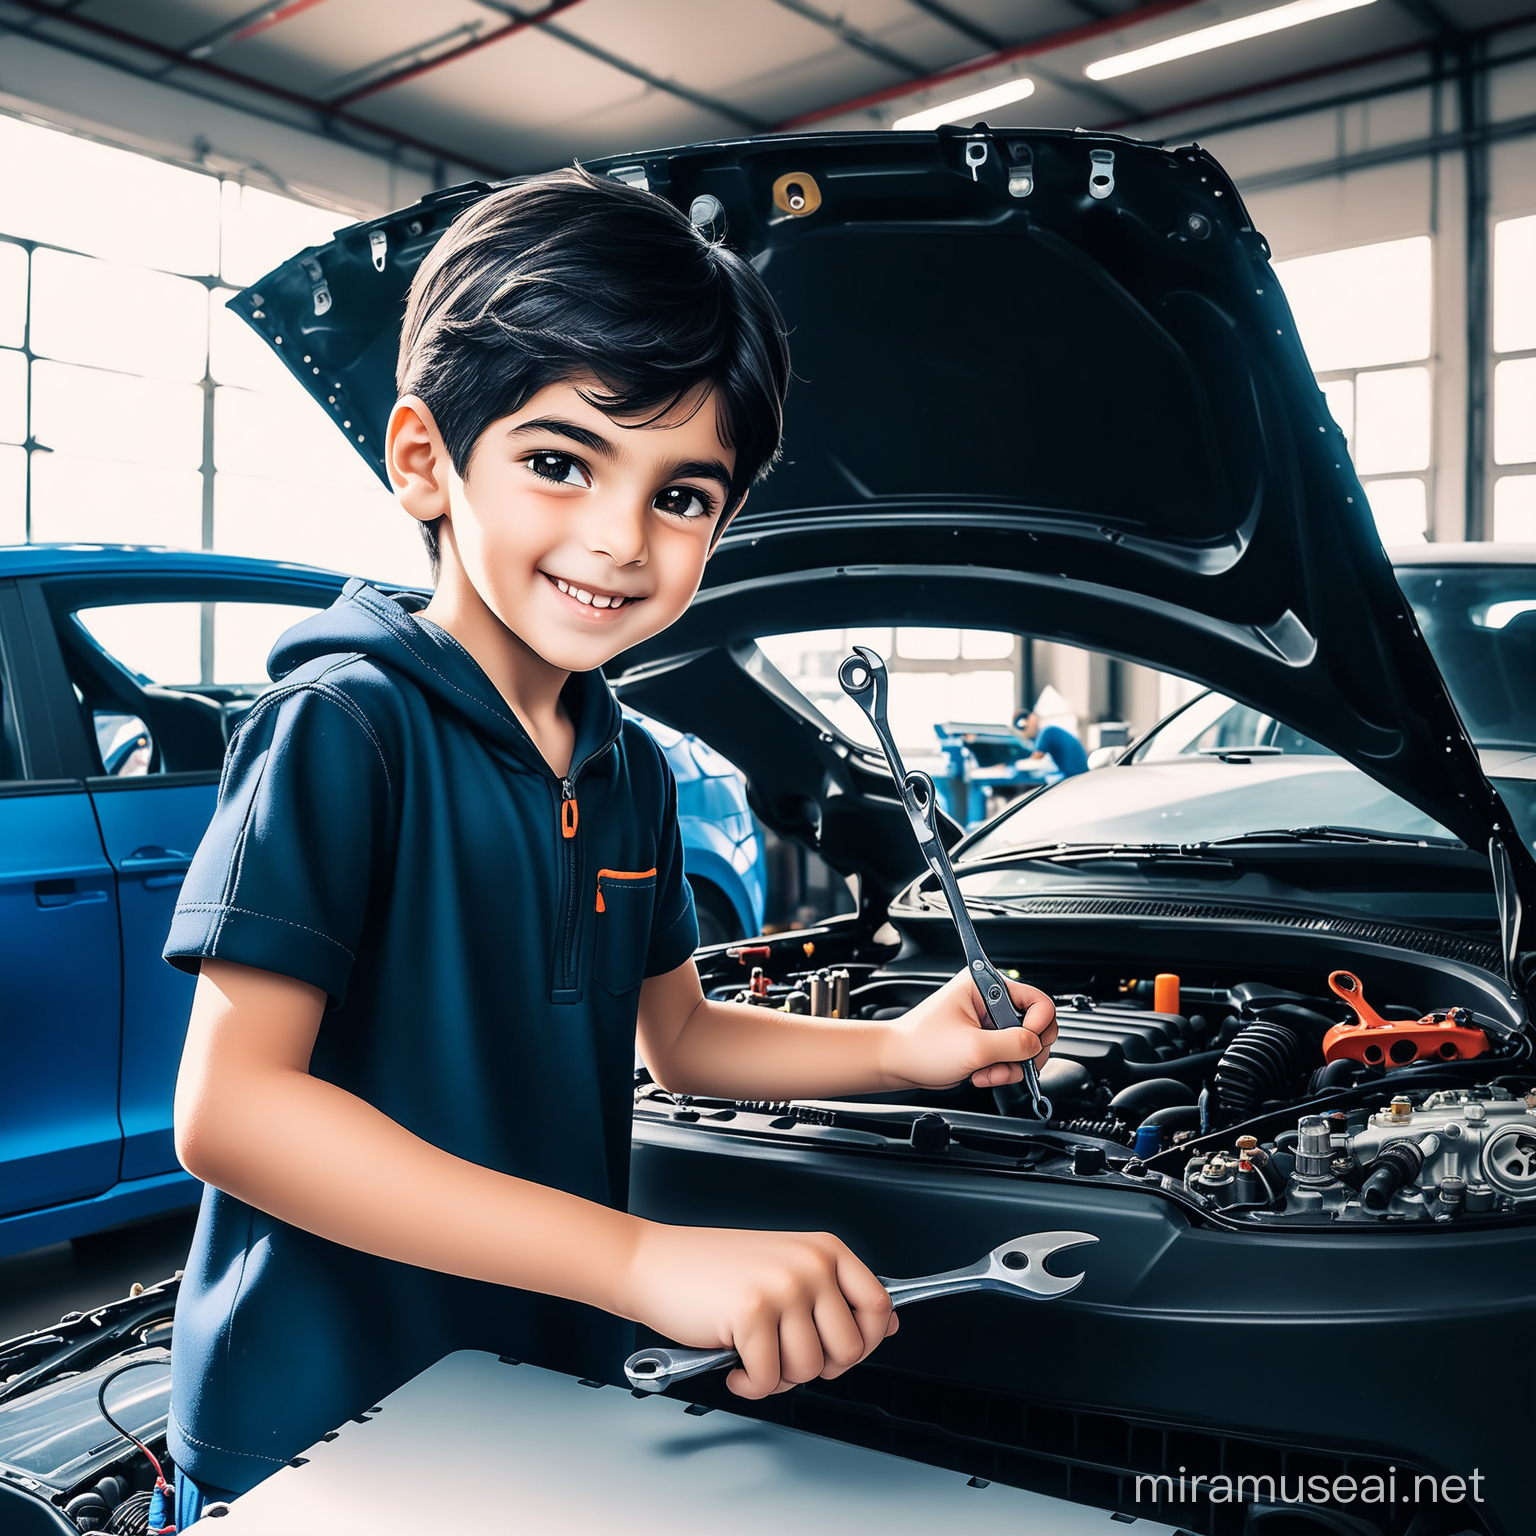 Ali is Persian little boy, 8 years old, cute, white skin, smiling, clothes with a lot of Persian designs.

Samandcr is a Samand car manufactured by Iran Khodro(IKCO), the hood is open, engine is visible.

Ali is repairing Samandcr with a wrench.

Atmosphere super modern auto repair, laptop, auto repairing tools on background.